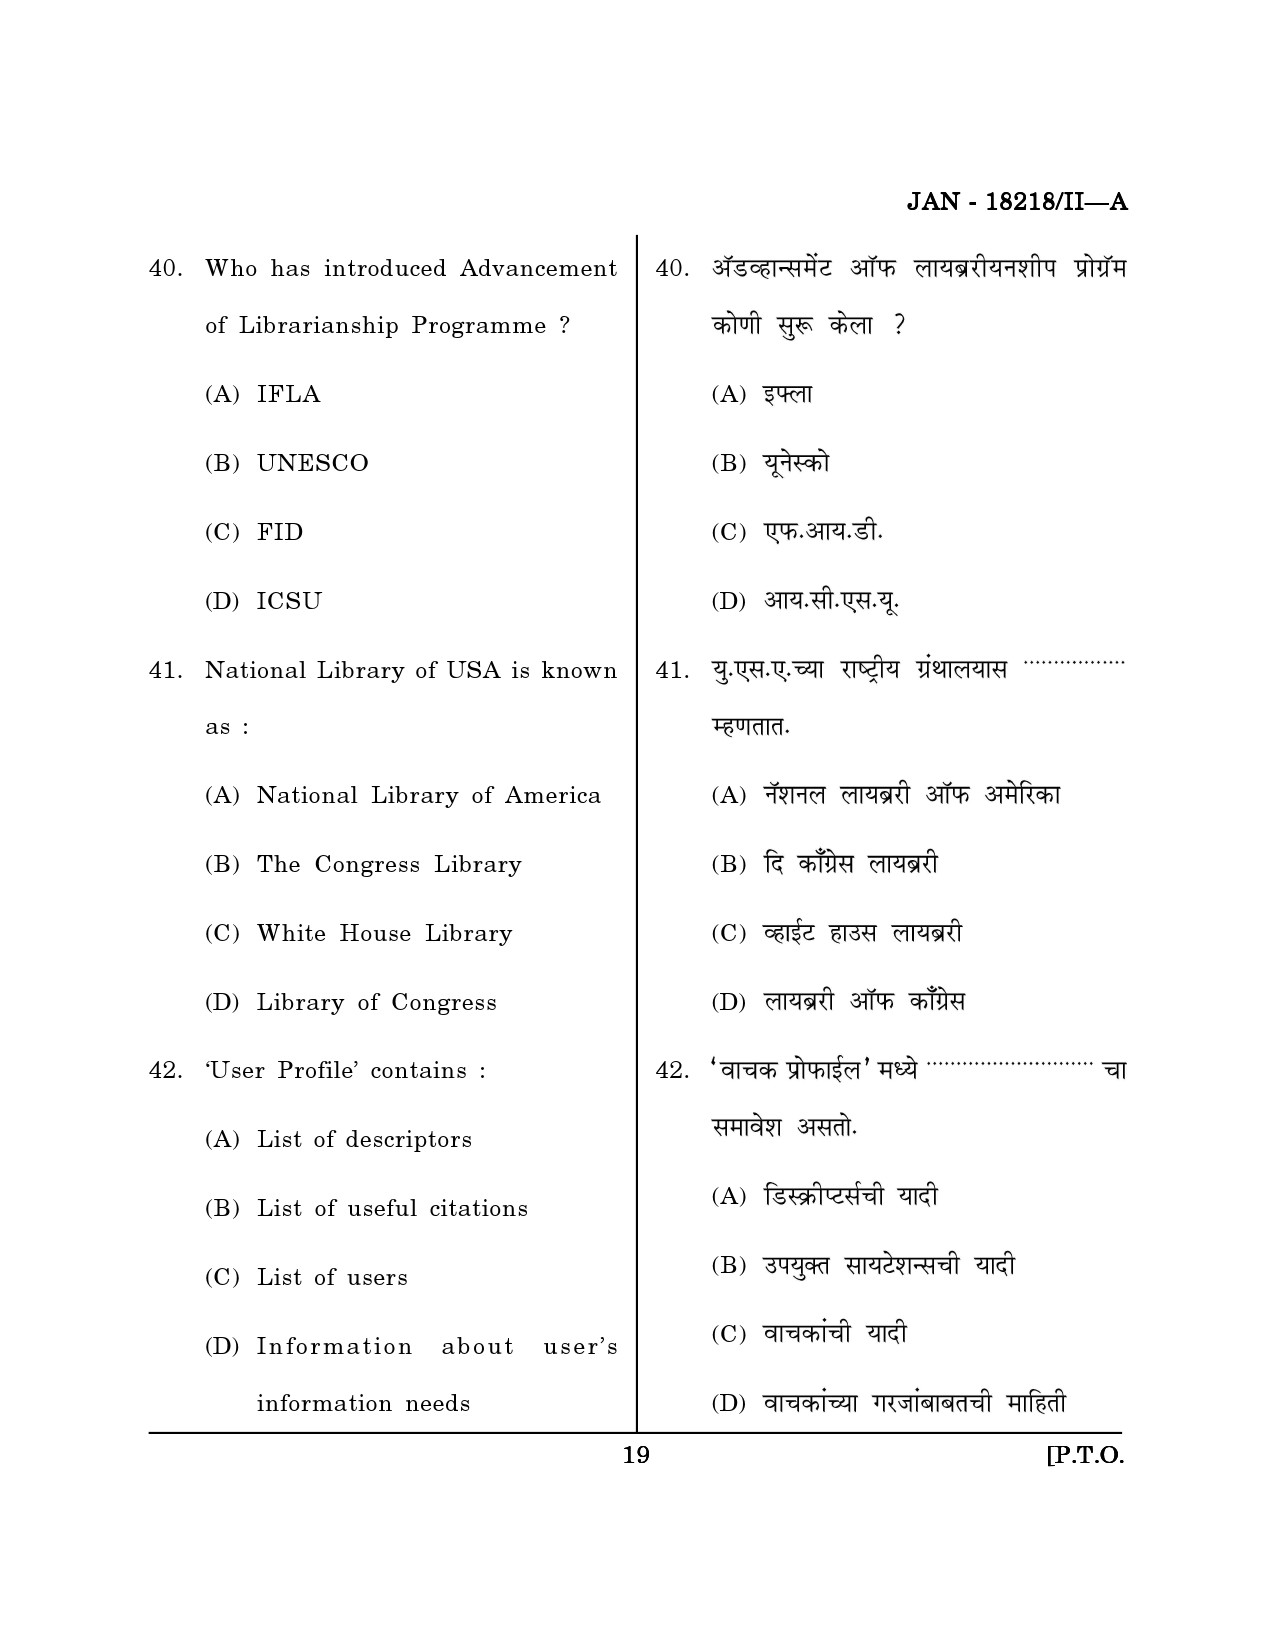 Maharashtra SET Library Information Science Question Paper II January 2018 18